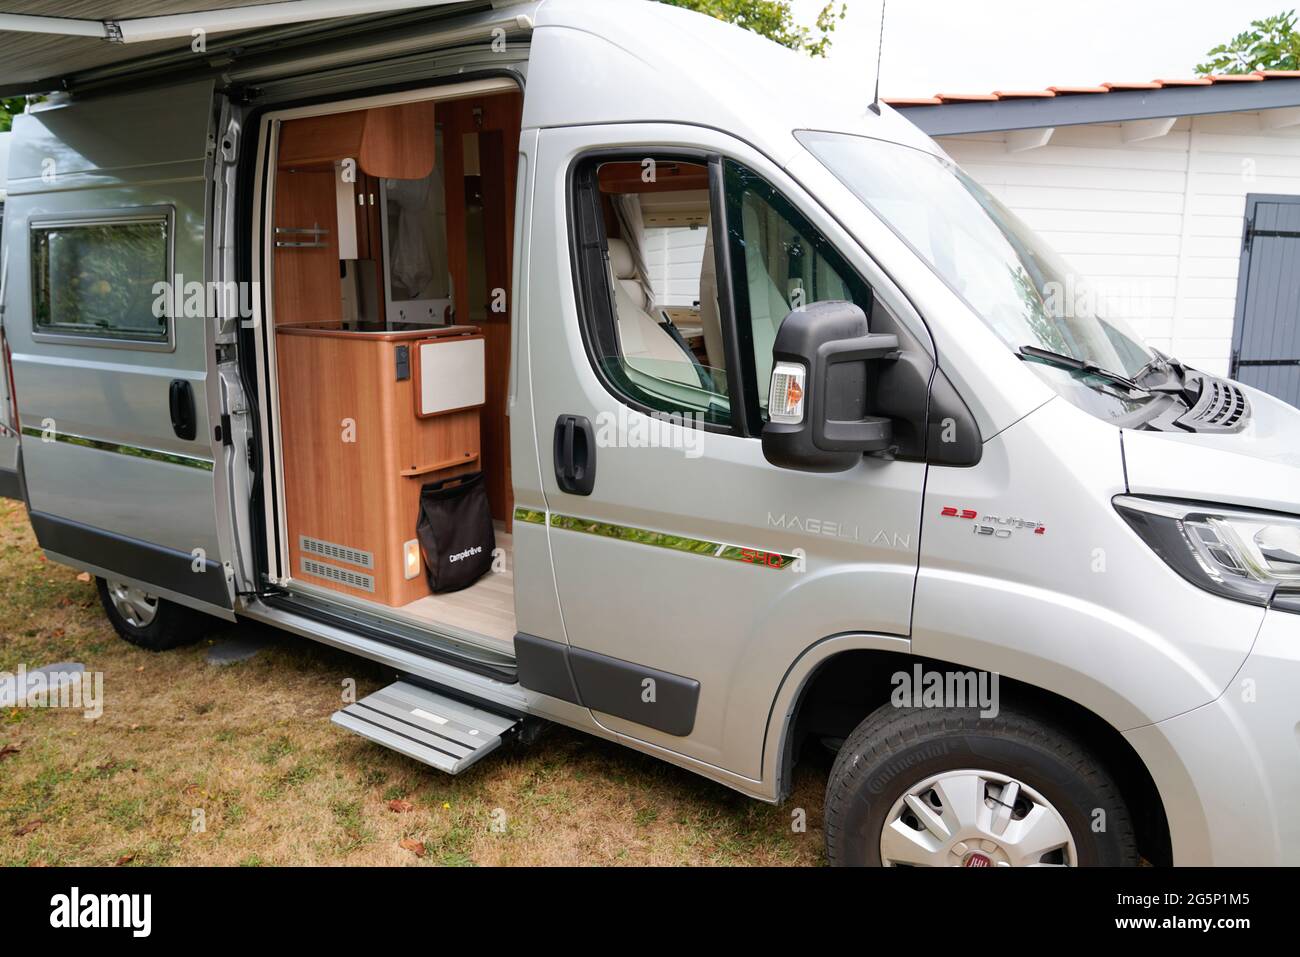 Fiat Ducato High Resolution Stock Photography and Images - Alamy